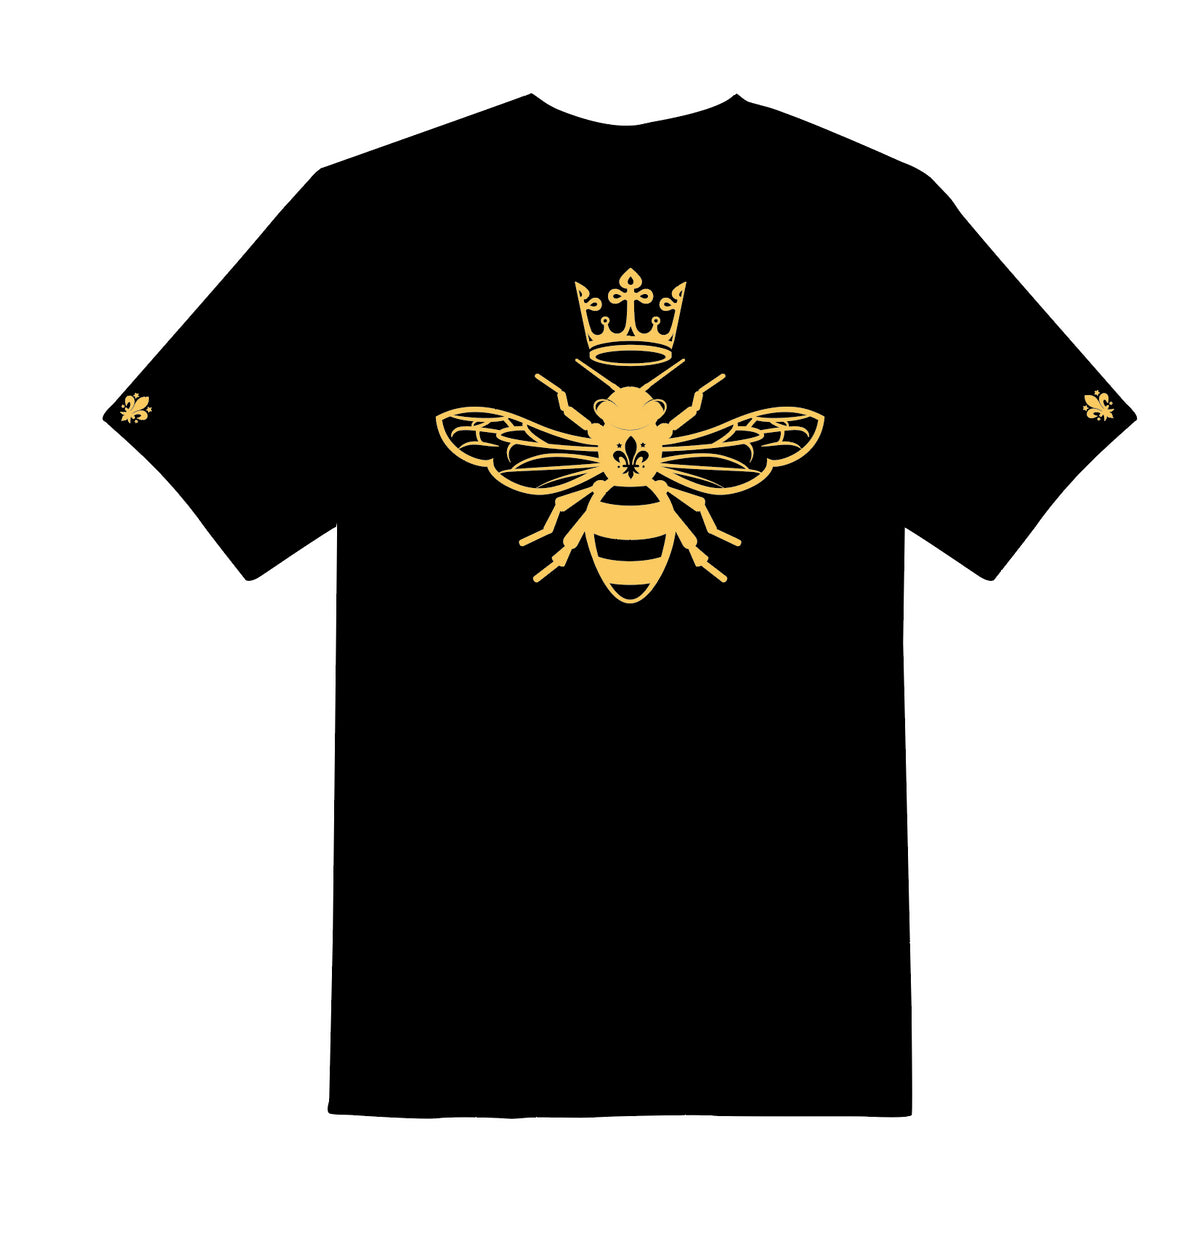 THE KING OF BEES